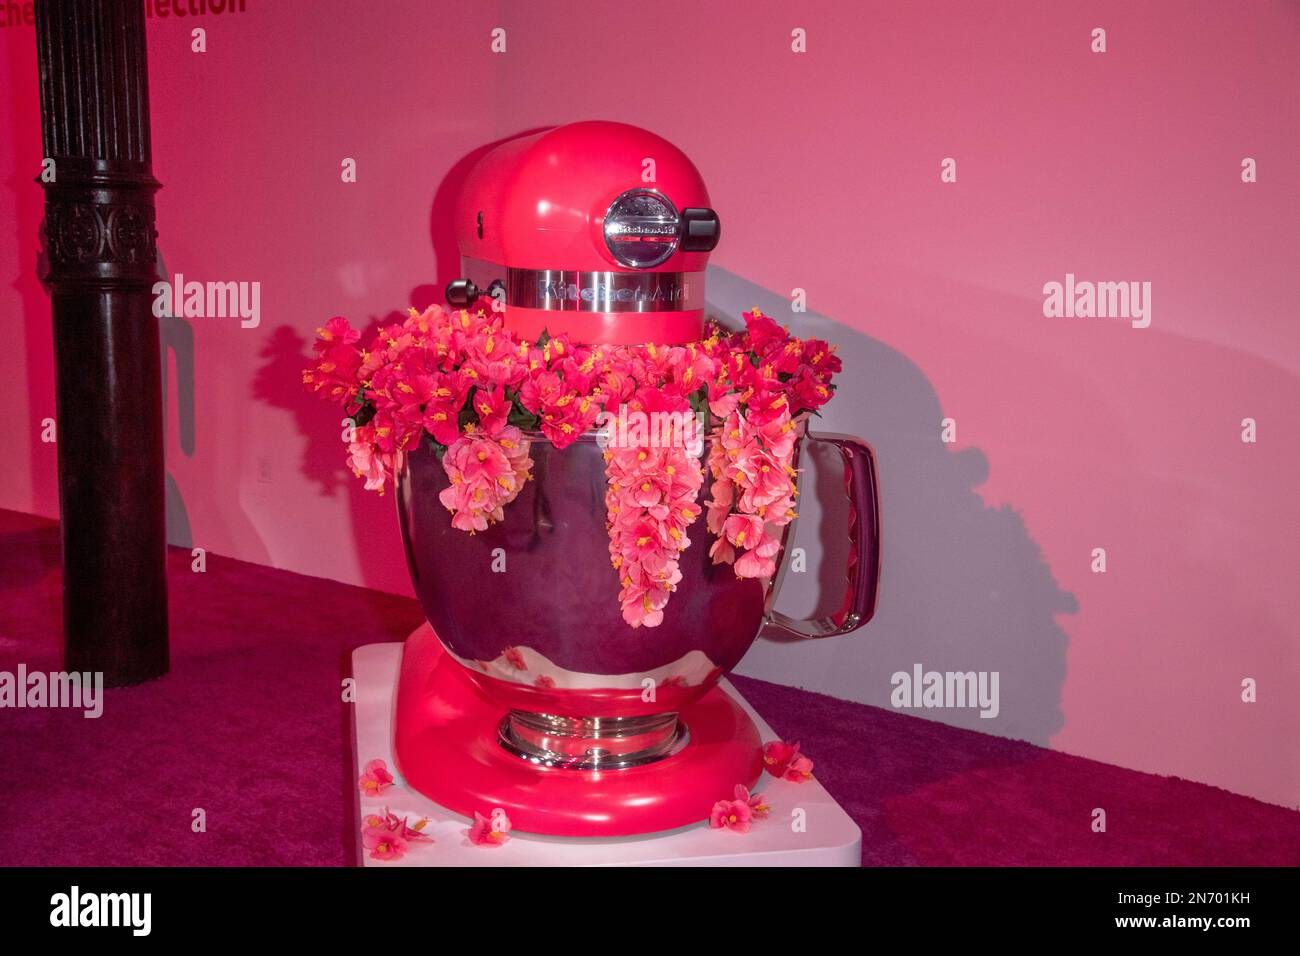 KitchenAid Just Announced Hibiscus Its 2023 Color of the Year